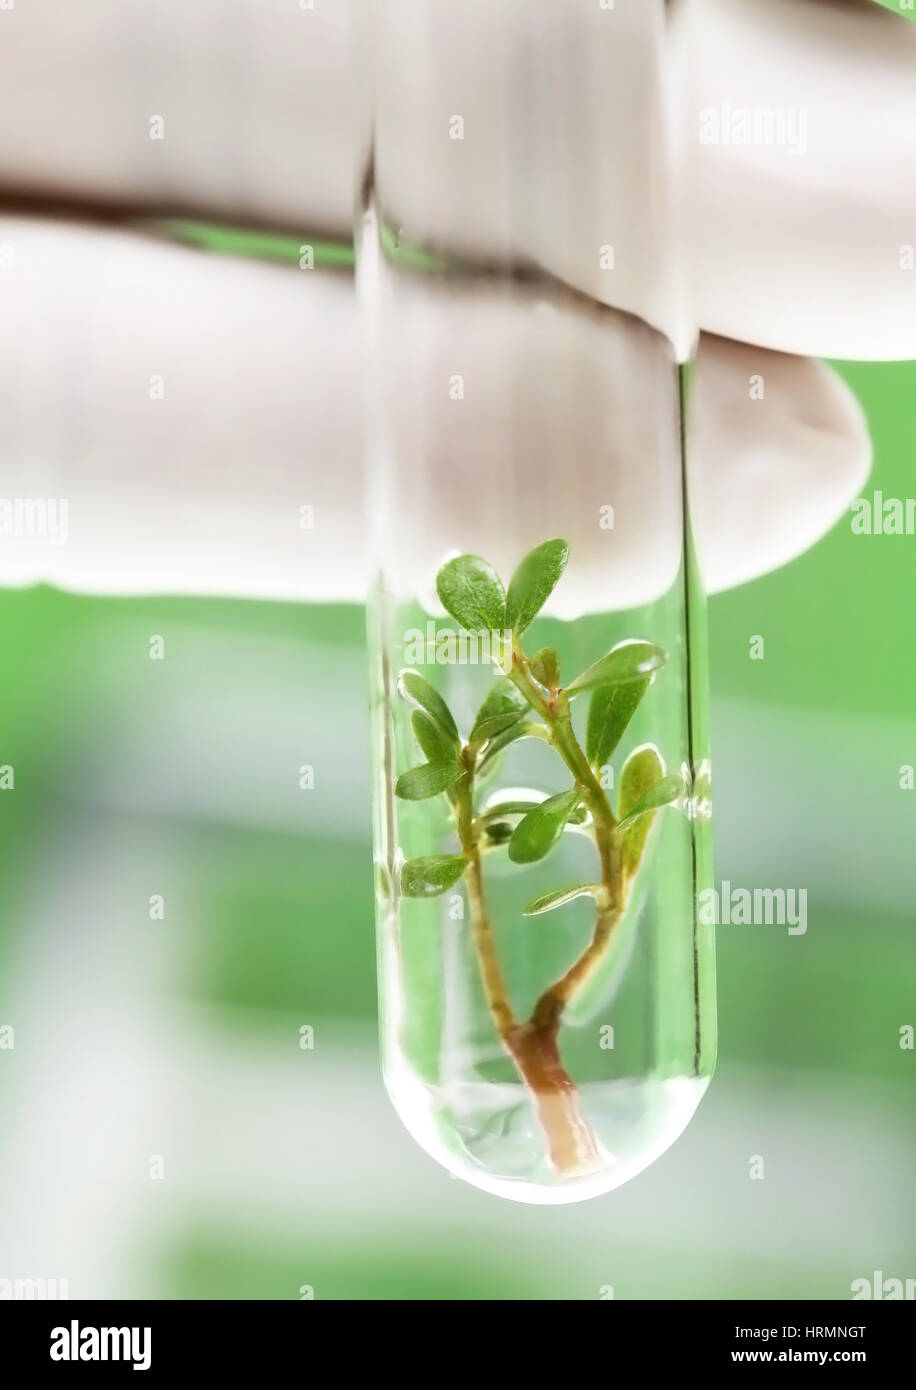 Tissue culture concept portrait by small plant in test tubes Stock Photo